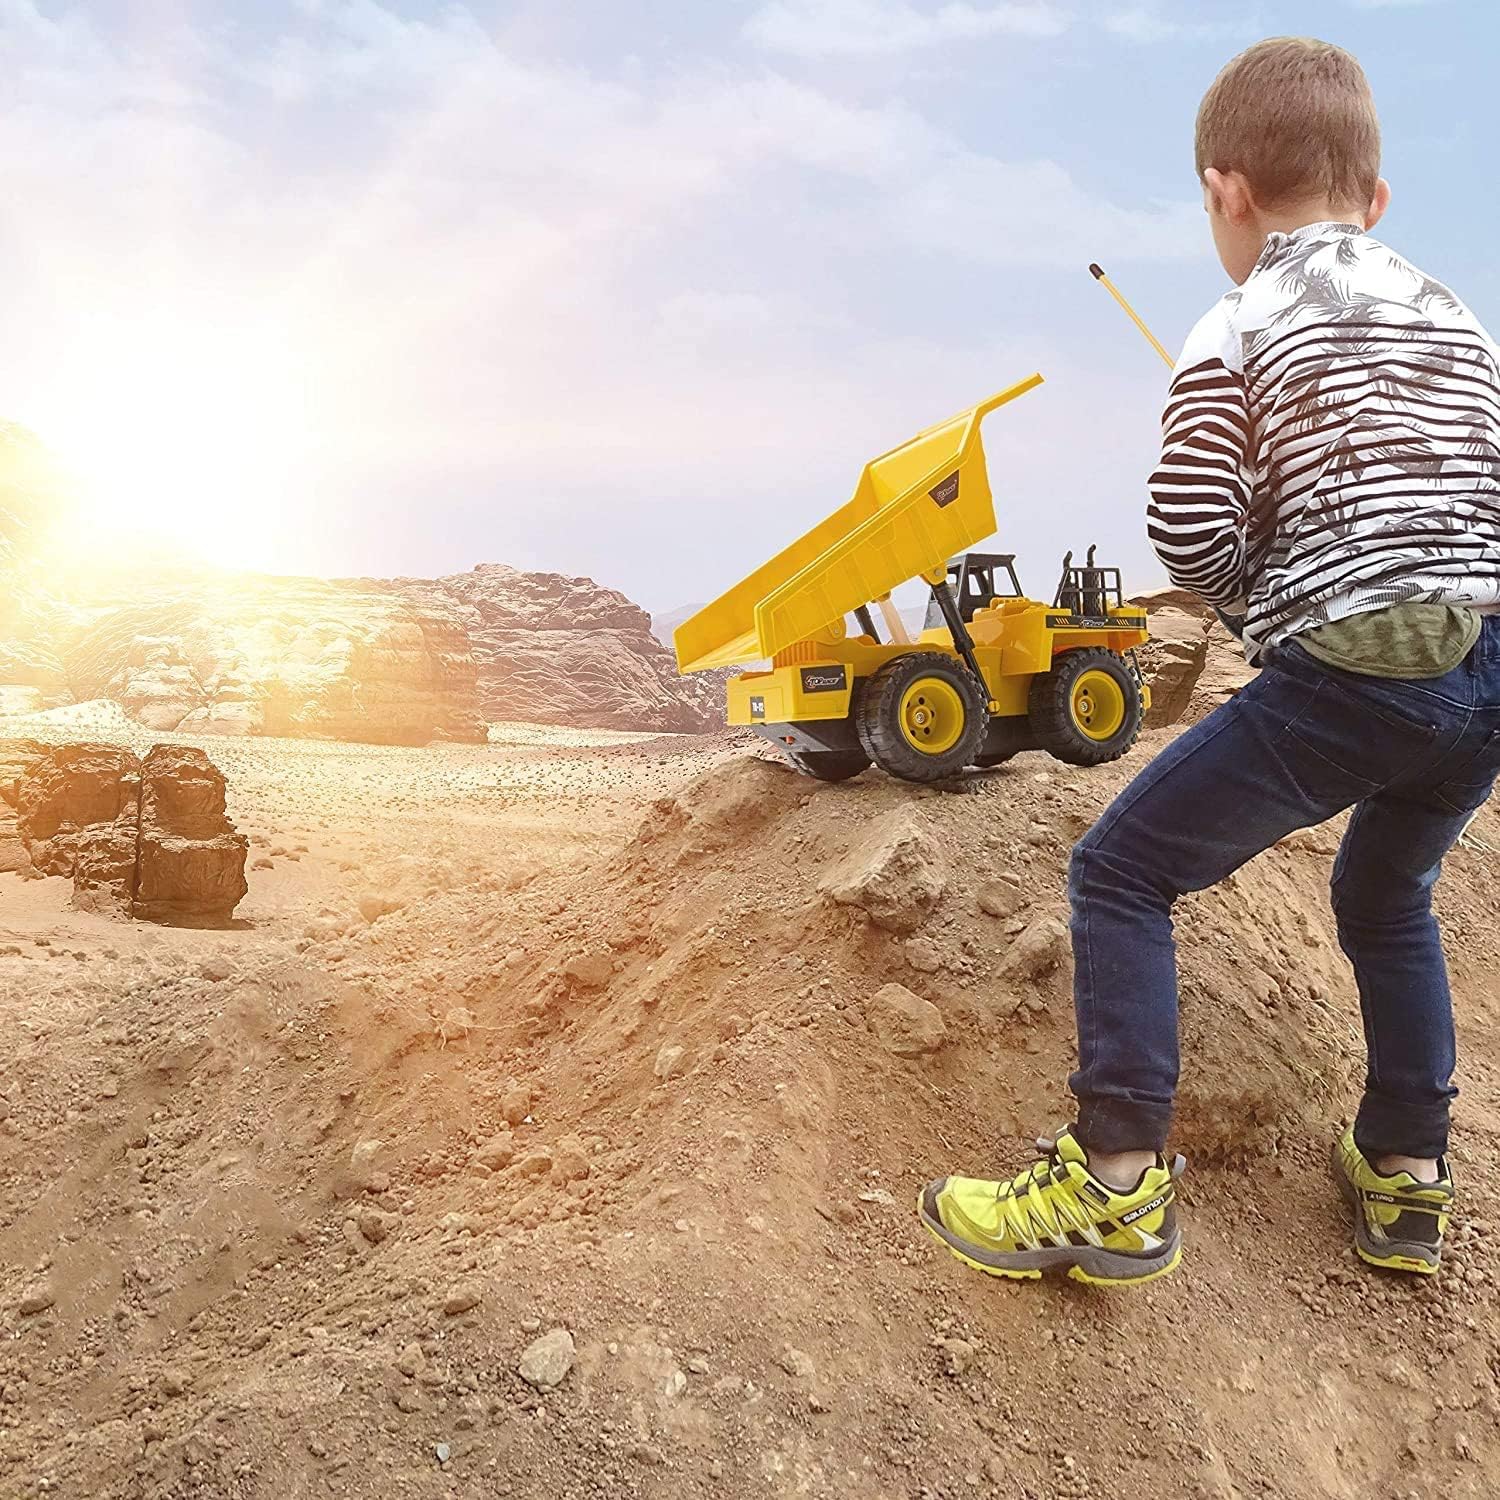 Top Race Remote Control Dump Truck Review: The Ultimate Toy for Kids